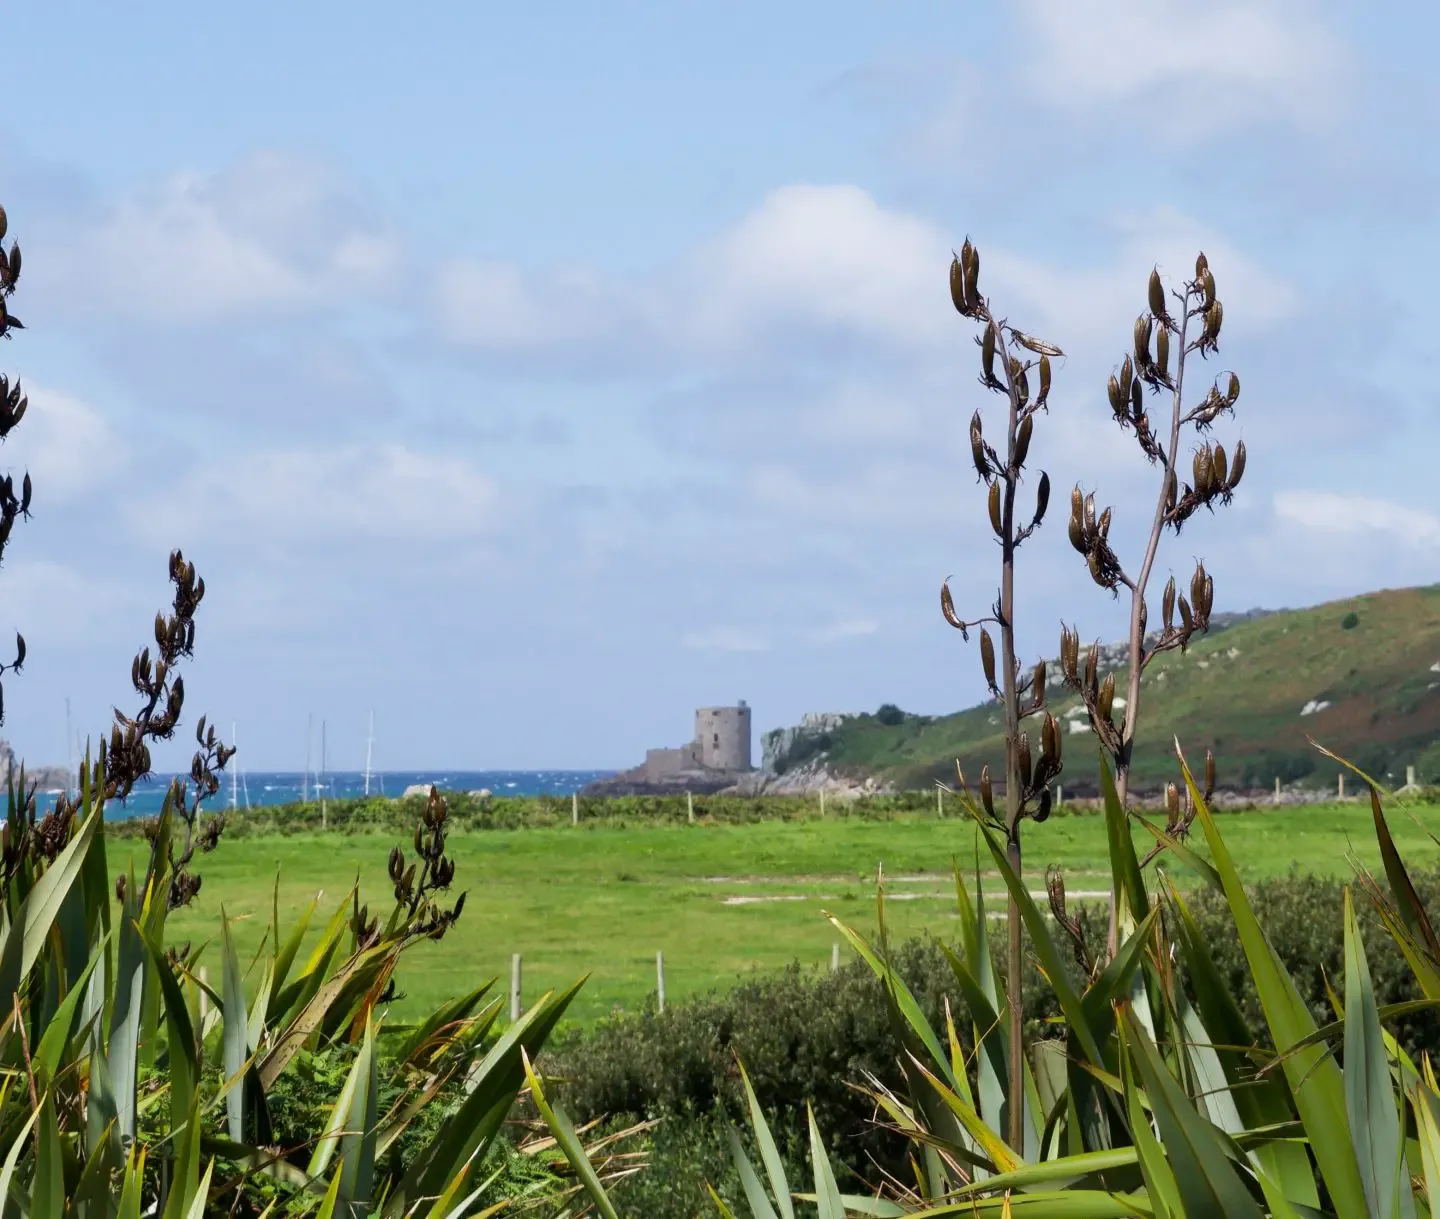 reasons to visit Isles of Scilly including beaches, views and incredible food